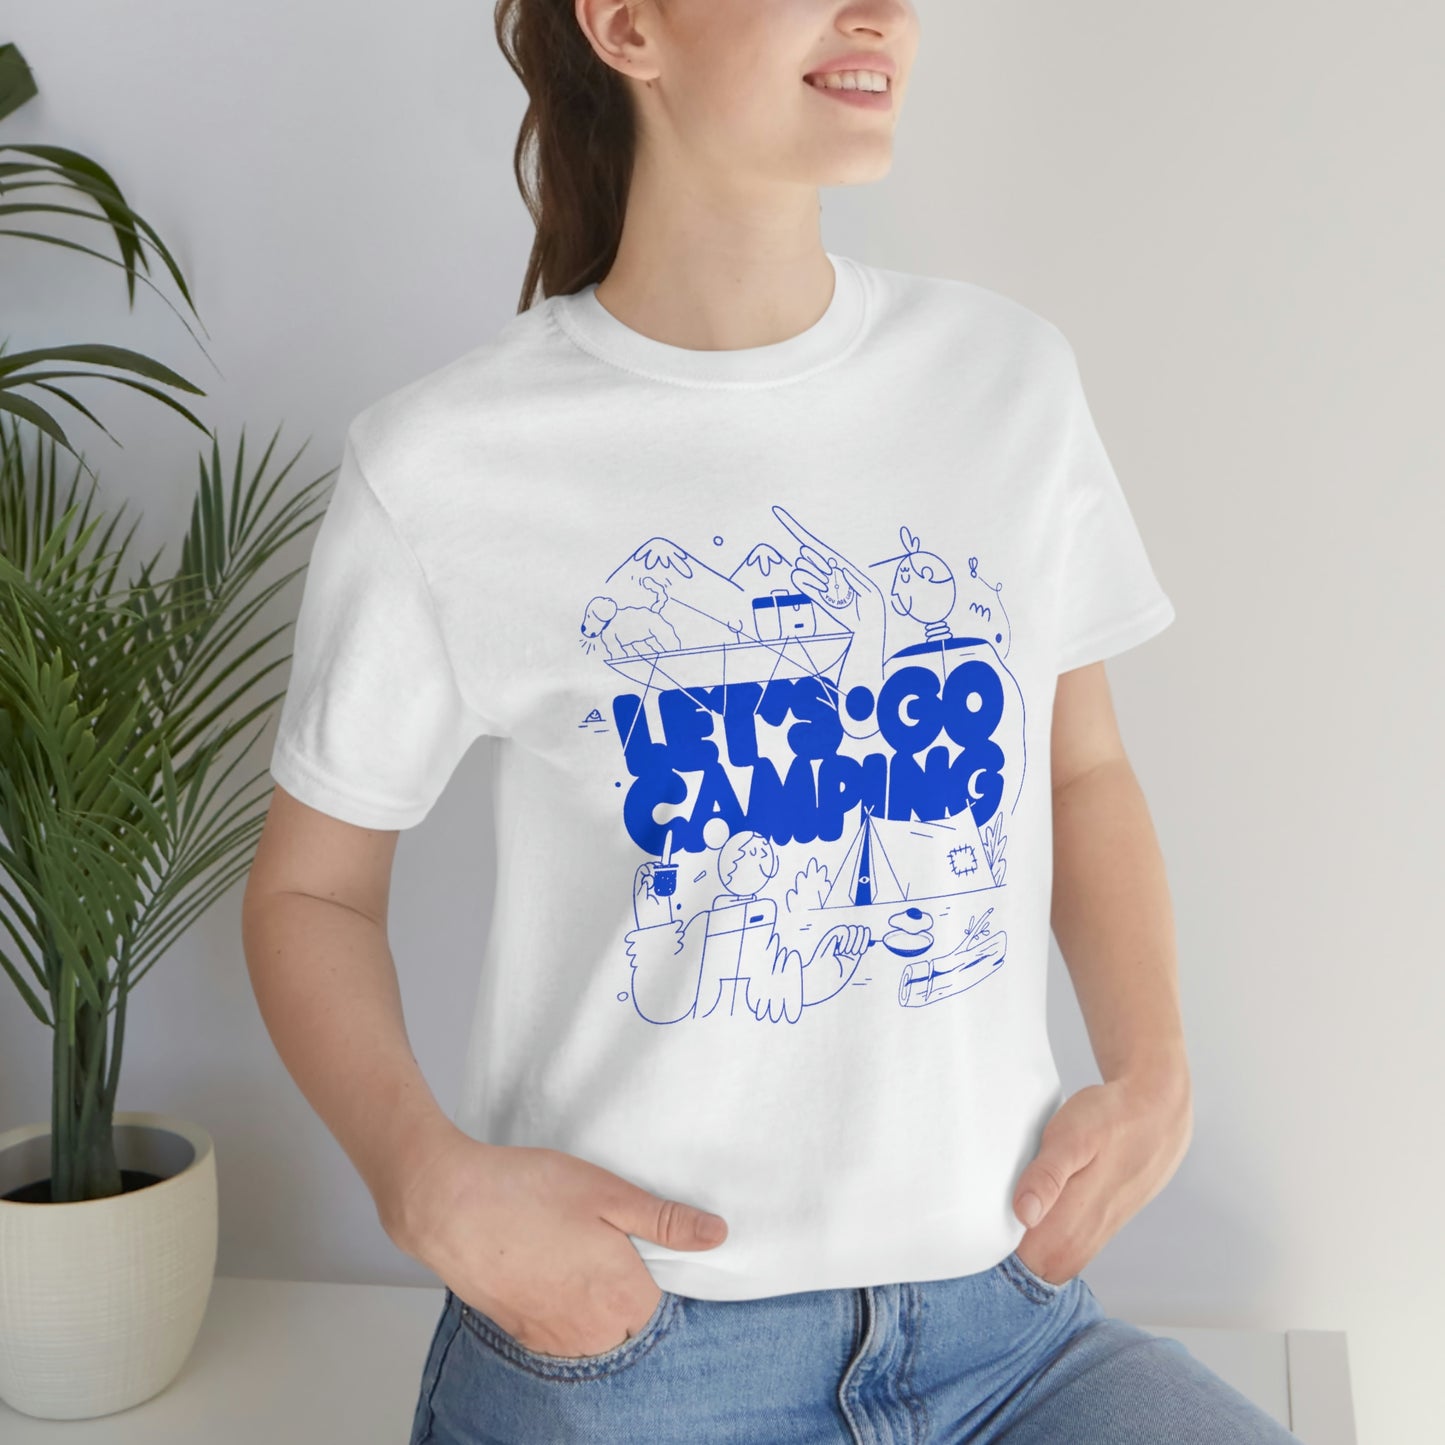 Let's Go Camping" Illustrated T-Shirt